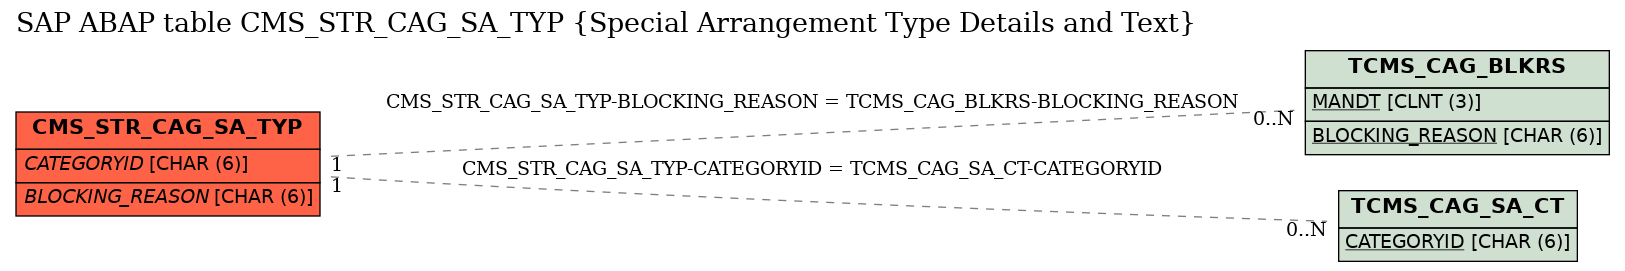 E-R Diagram for table CMS_STR_CAG_SA_TYP (Special Arrangement Type Details and Text)